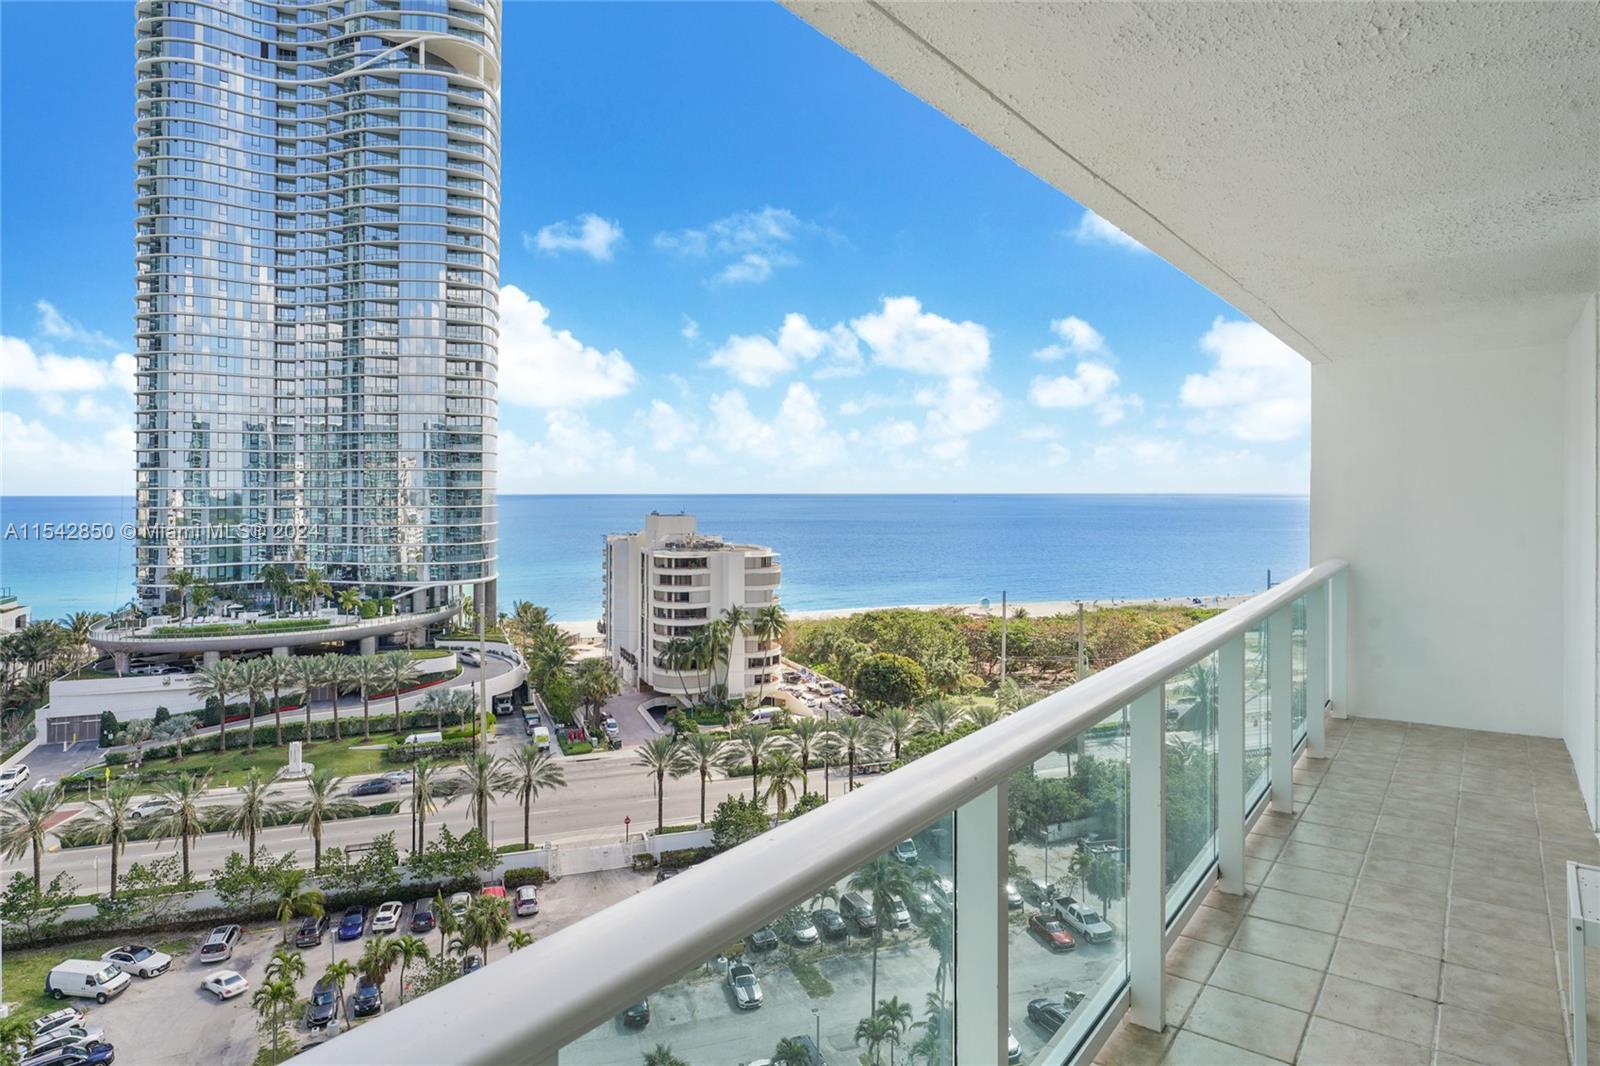 Photo of 100 Bayview Dr #1411 in Sunny Isles Beach, FL